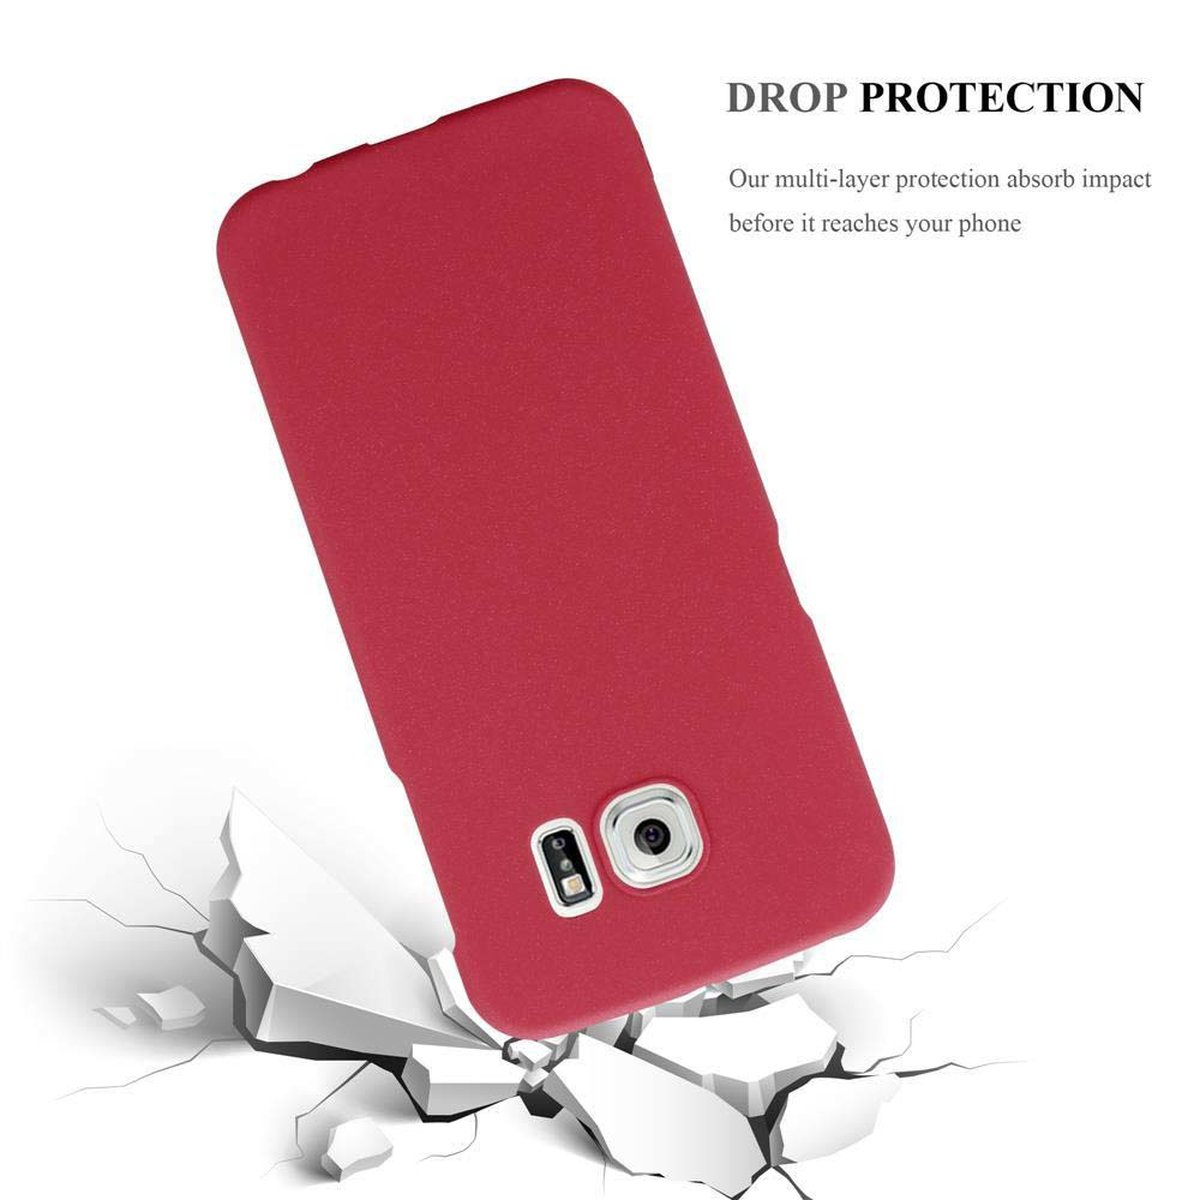 Backcover, FROSTY PLUS, CADORABO Galaxy Case Style, ROT im Hard Samsung, EDGE Frosty S6 Hülle